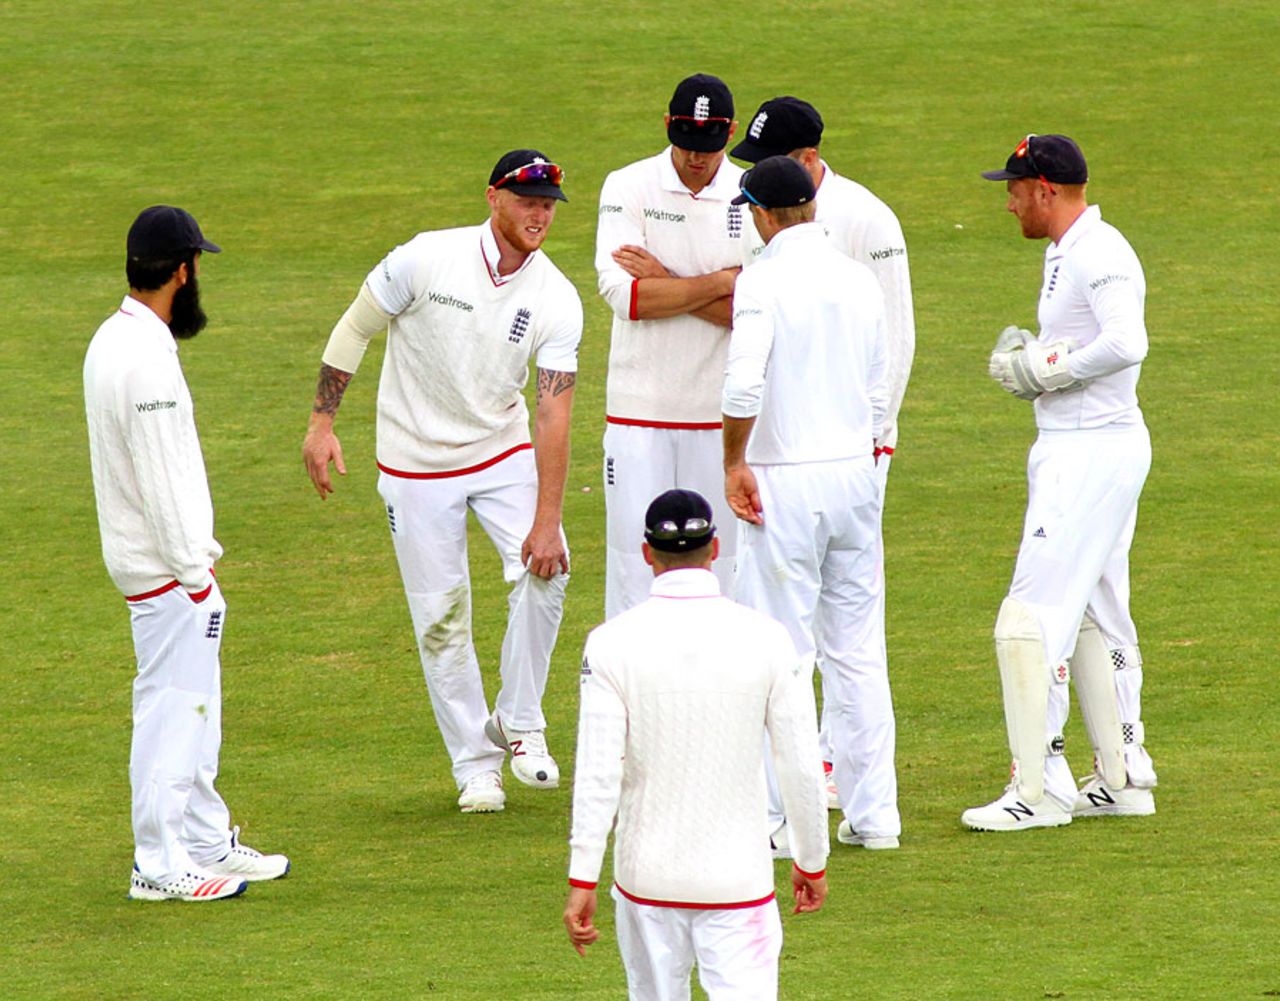 Ben Stokes had some discomfort with his knee, England v Sri Lanka, 1st Test, Headingley, 2nd day, May 20, 2016